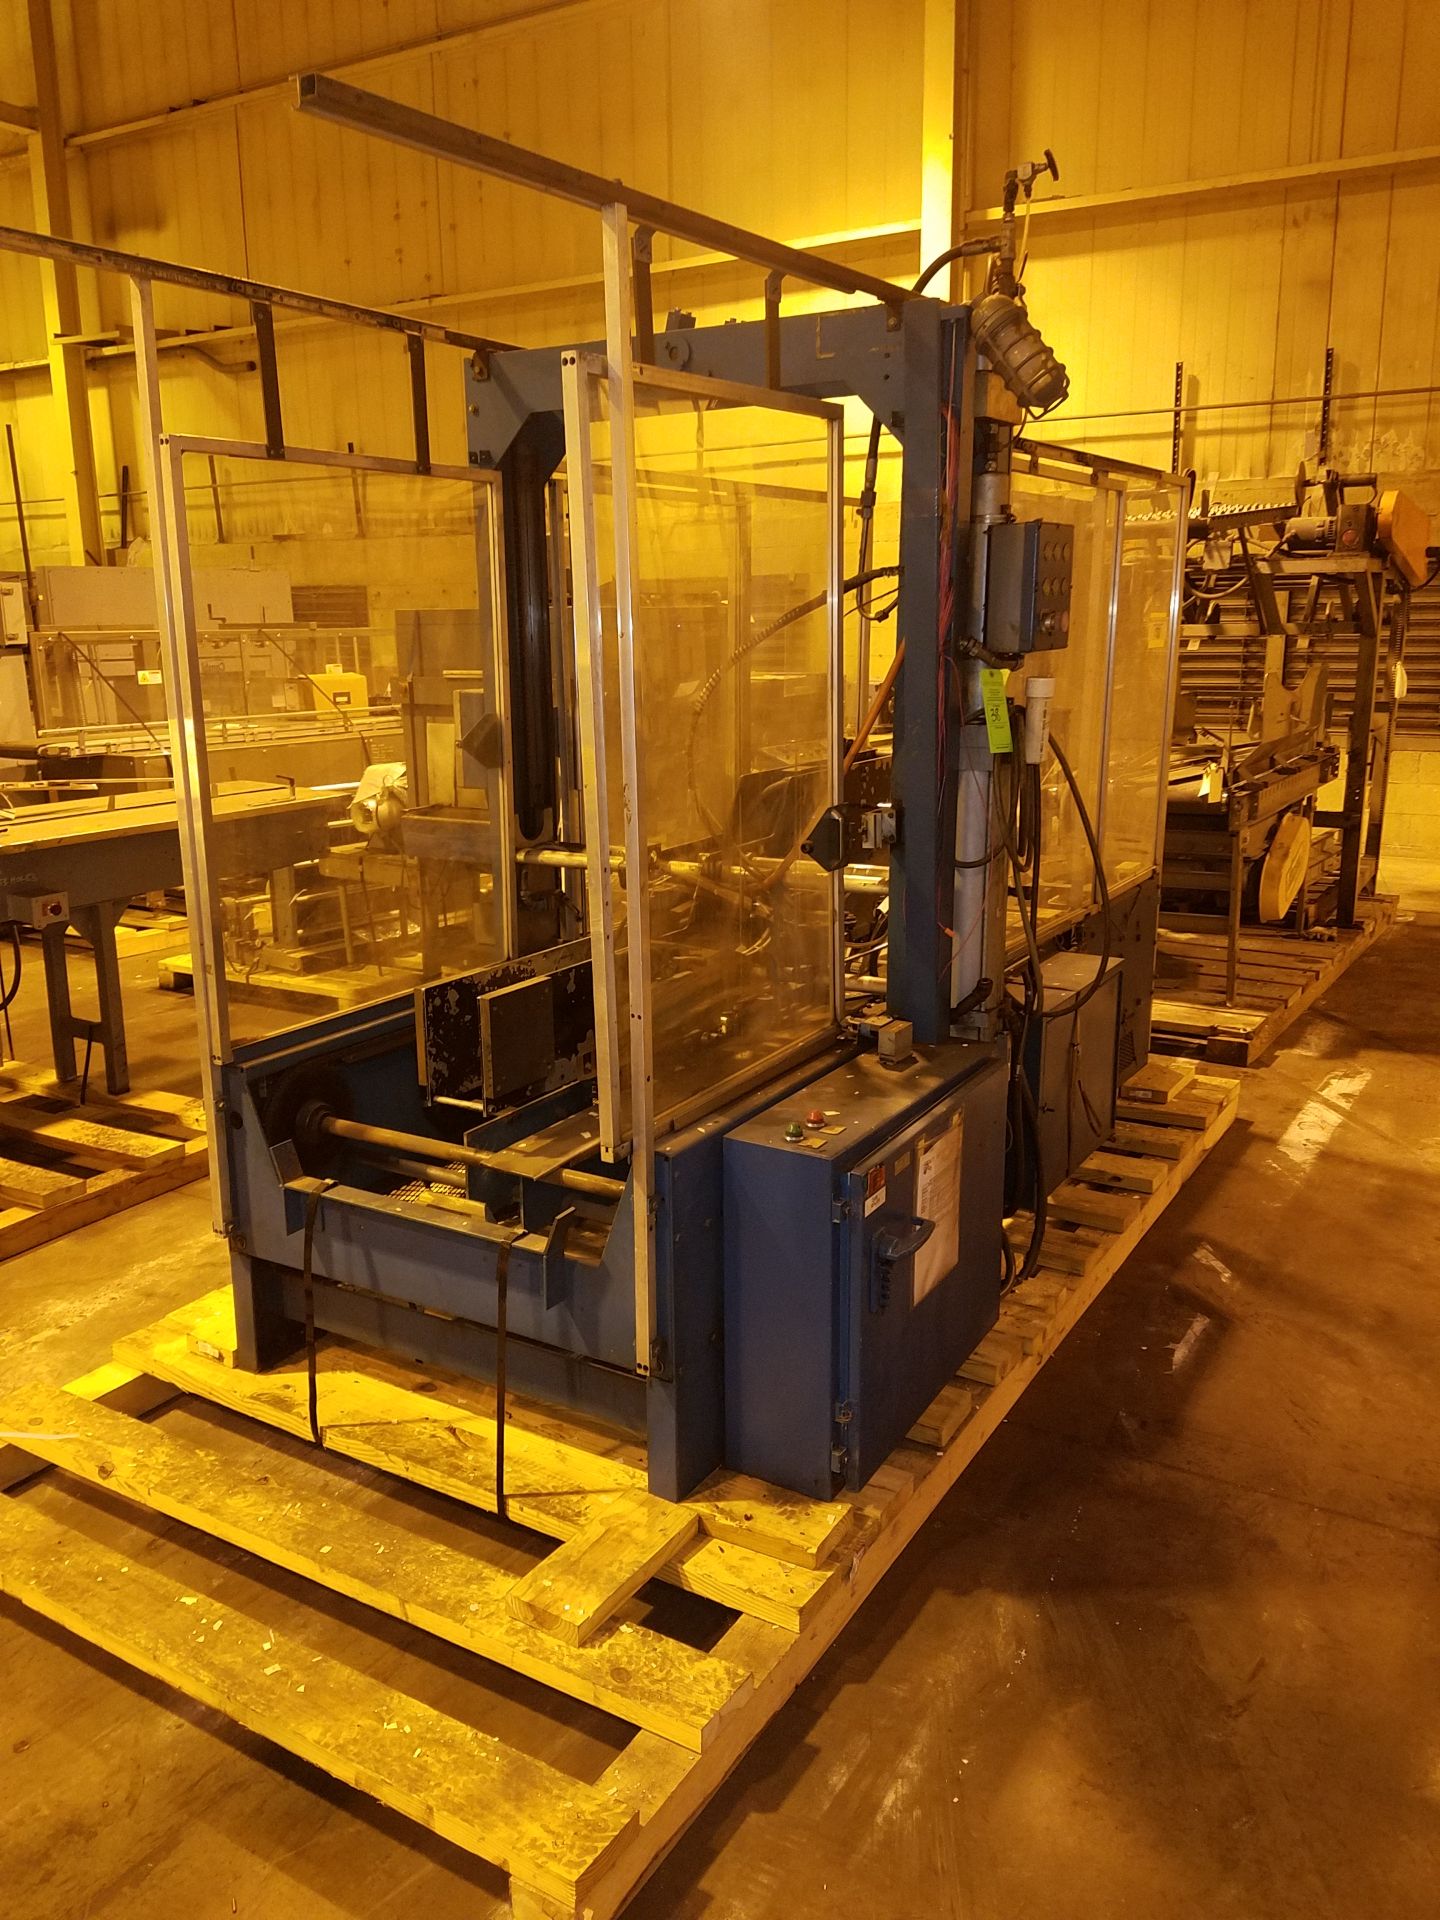 LOVESHAW PADLOCKER CASE SEALER MODEL PST350 S#22-074-322(LOCATED AT 880 MAPLE AVE, CONNEAUT, OH